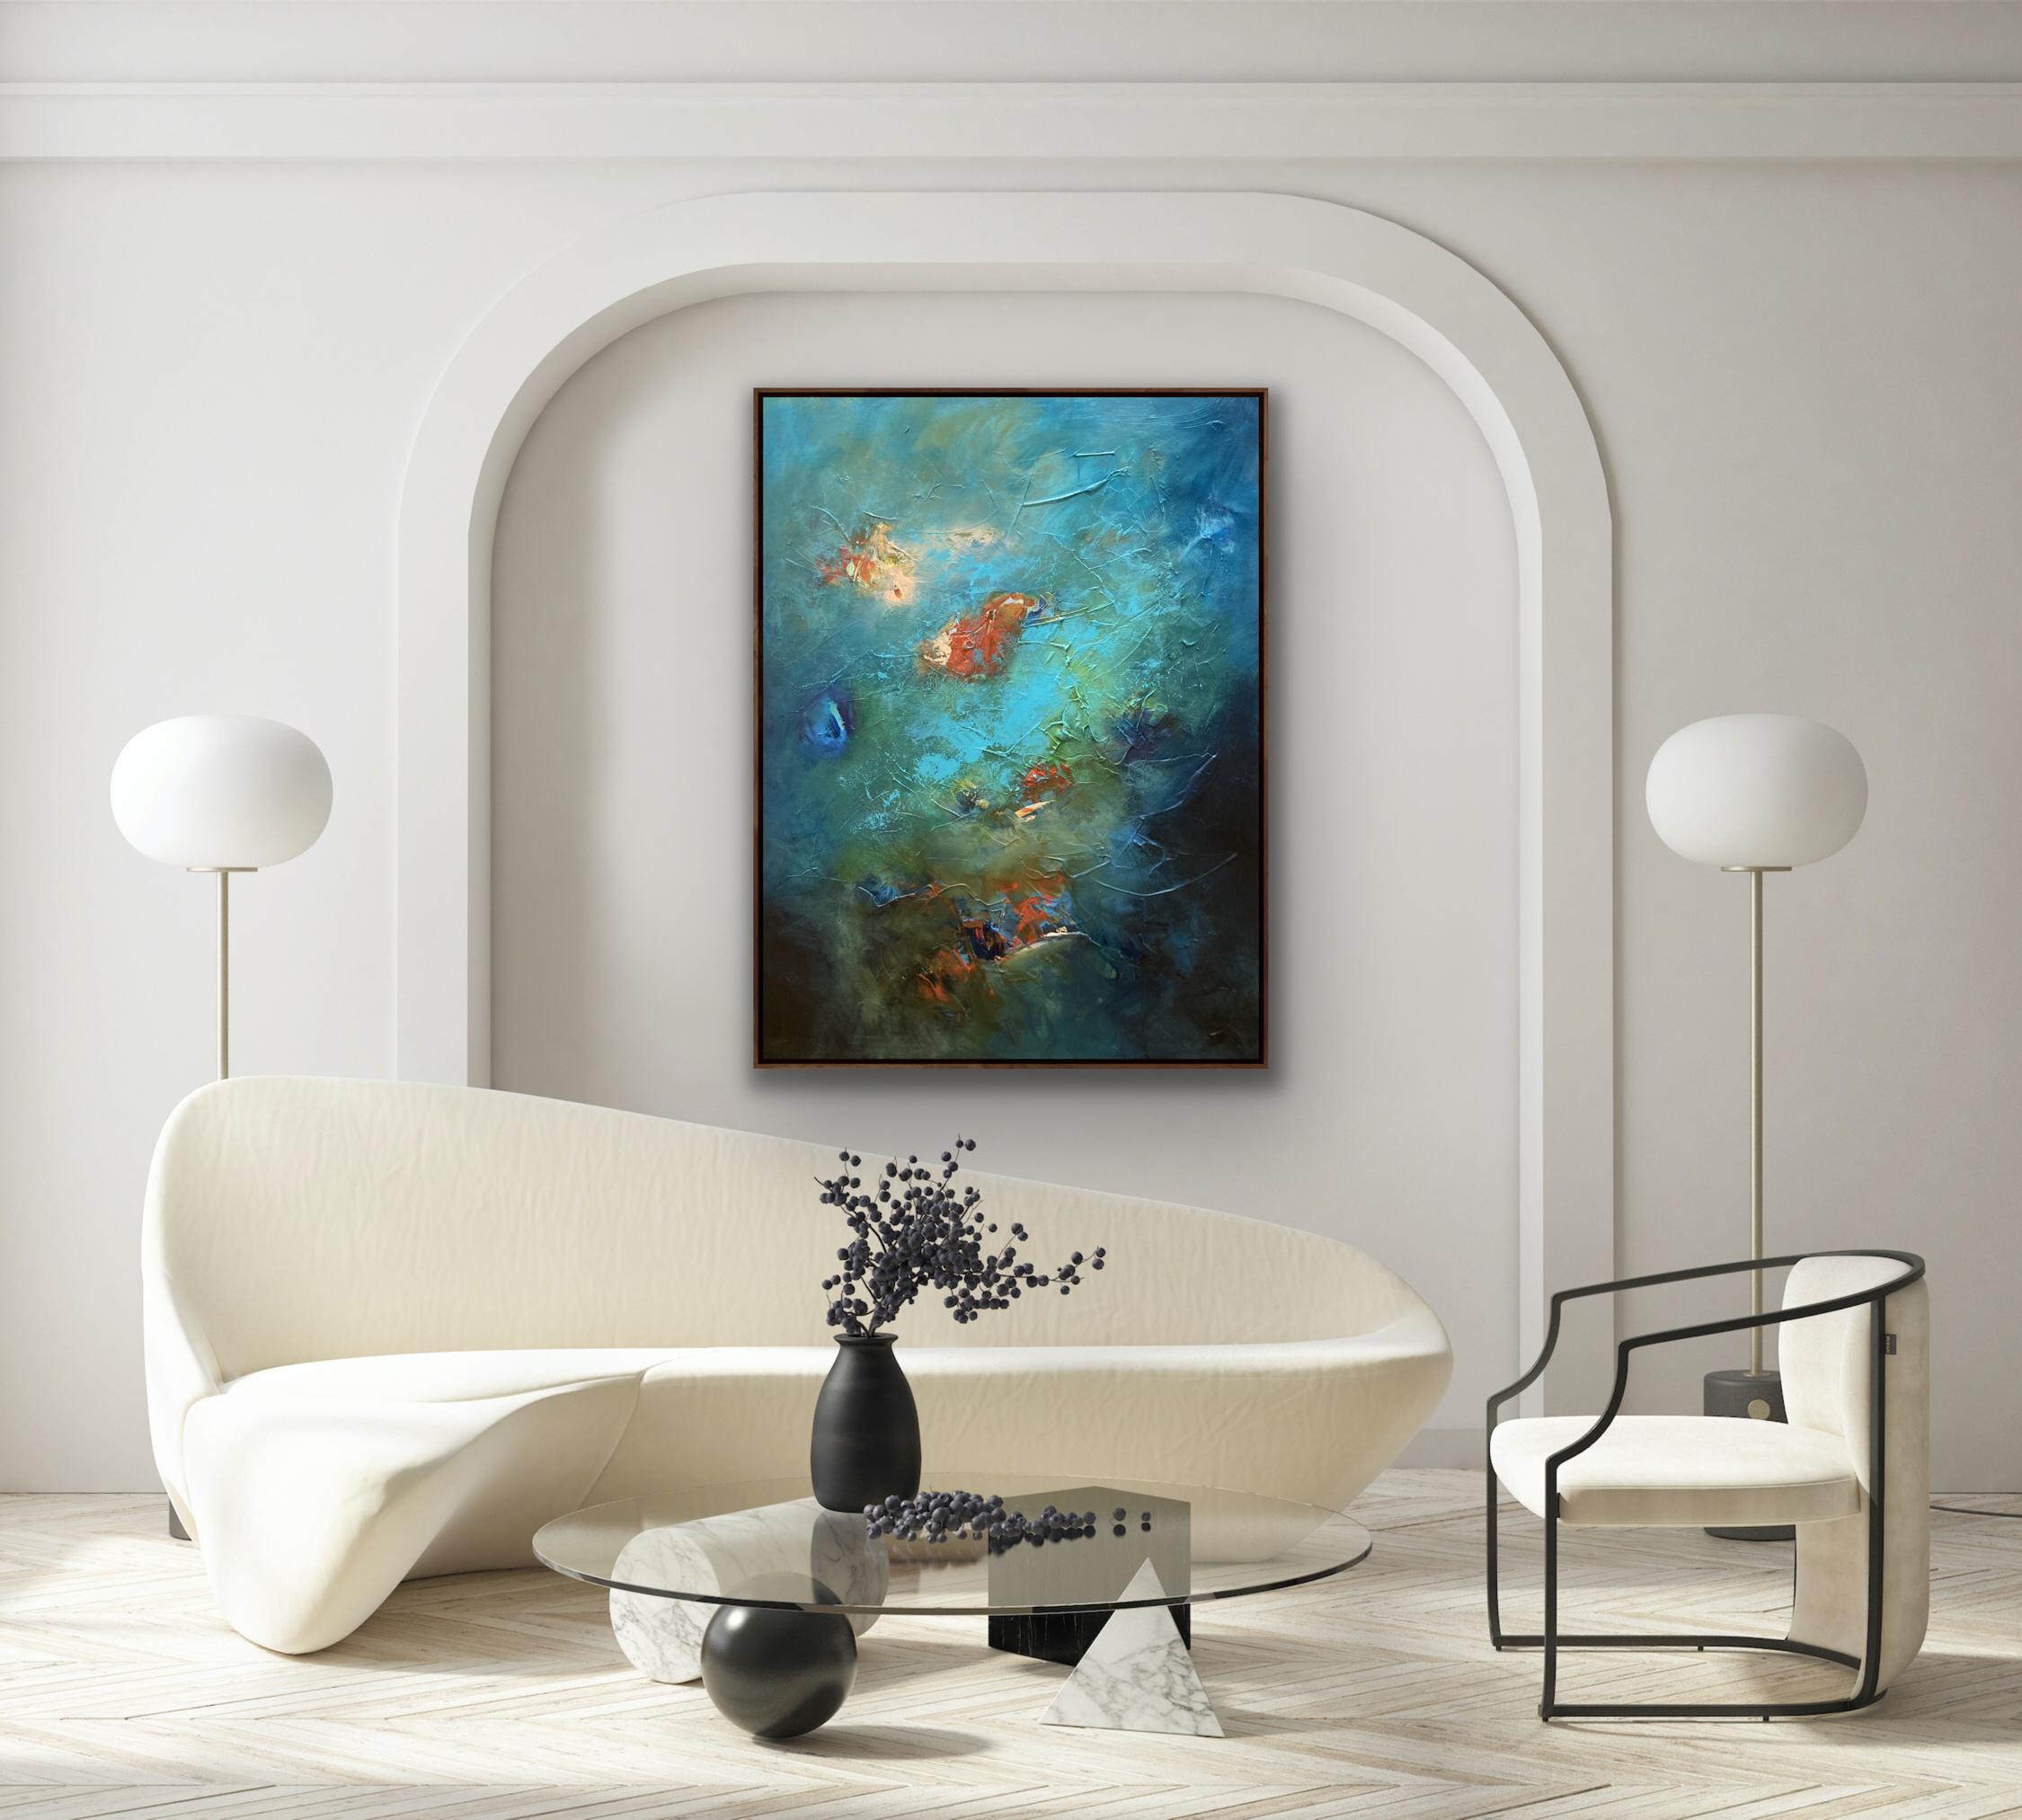 Deep Down, Susanne Winter, Acrylic on canvas, Original painting for sale - Contemporary Painting by  Susanne Winter 